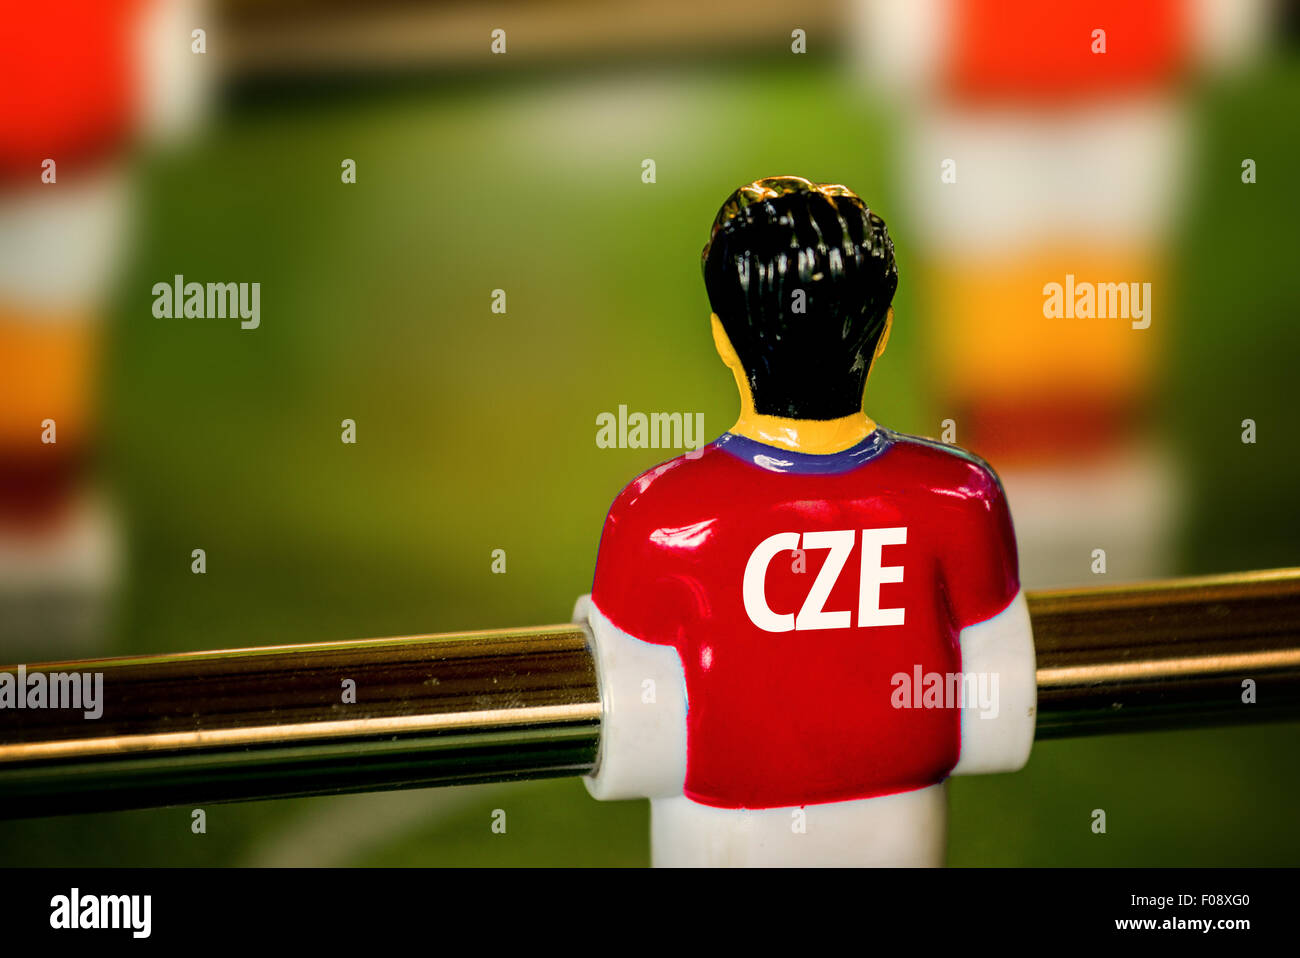 Czech National Jersey on Vintage Foosball, Table Soccer or Football Kicker Game, Selective Focus, Retro Tone Effect Stock Photo